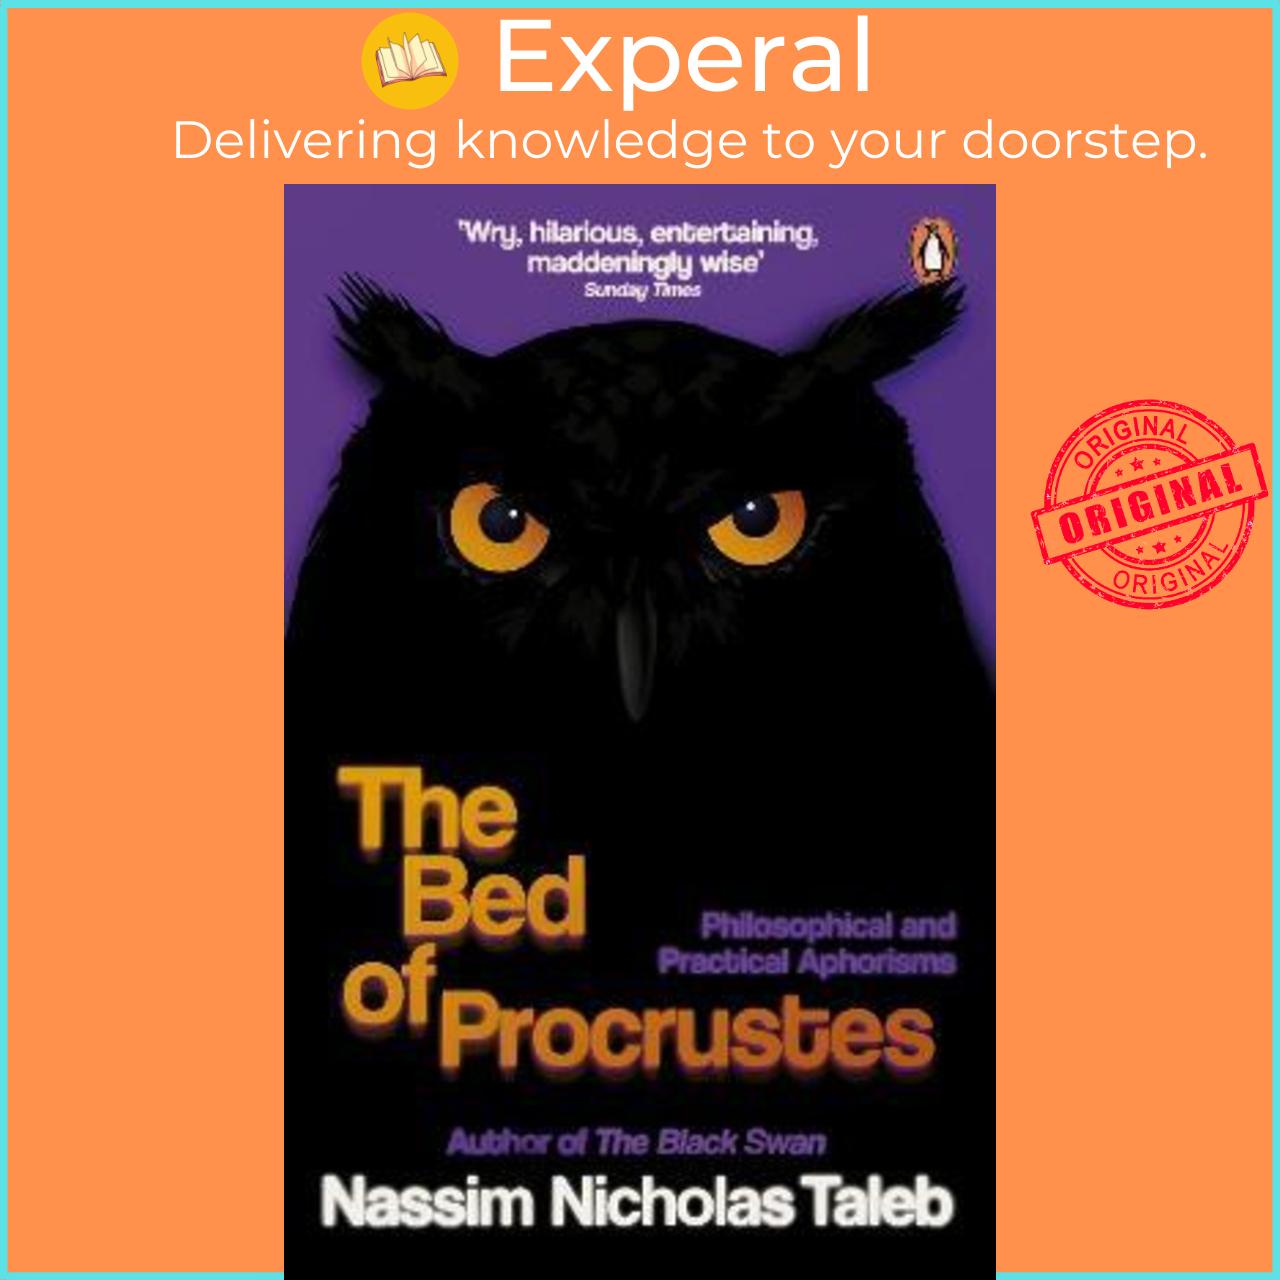 Sách - The Bed of Procrustes : Philosophical and Practical Aphorisms by Nassim Nicholas Taleb (UK edition, paperback)